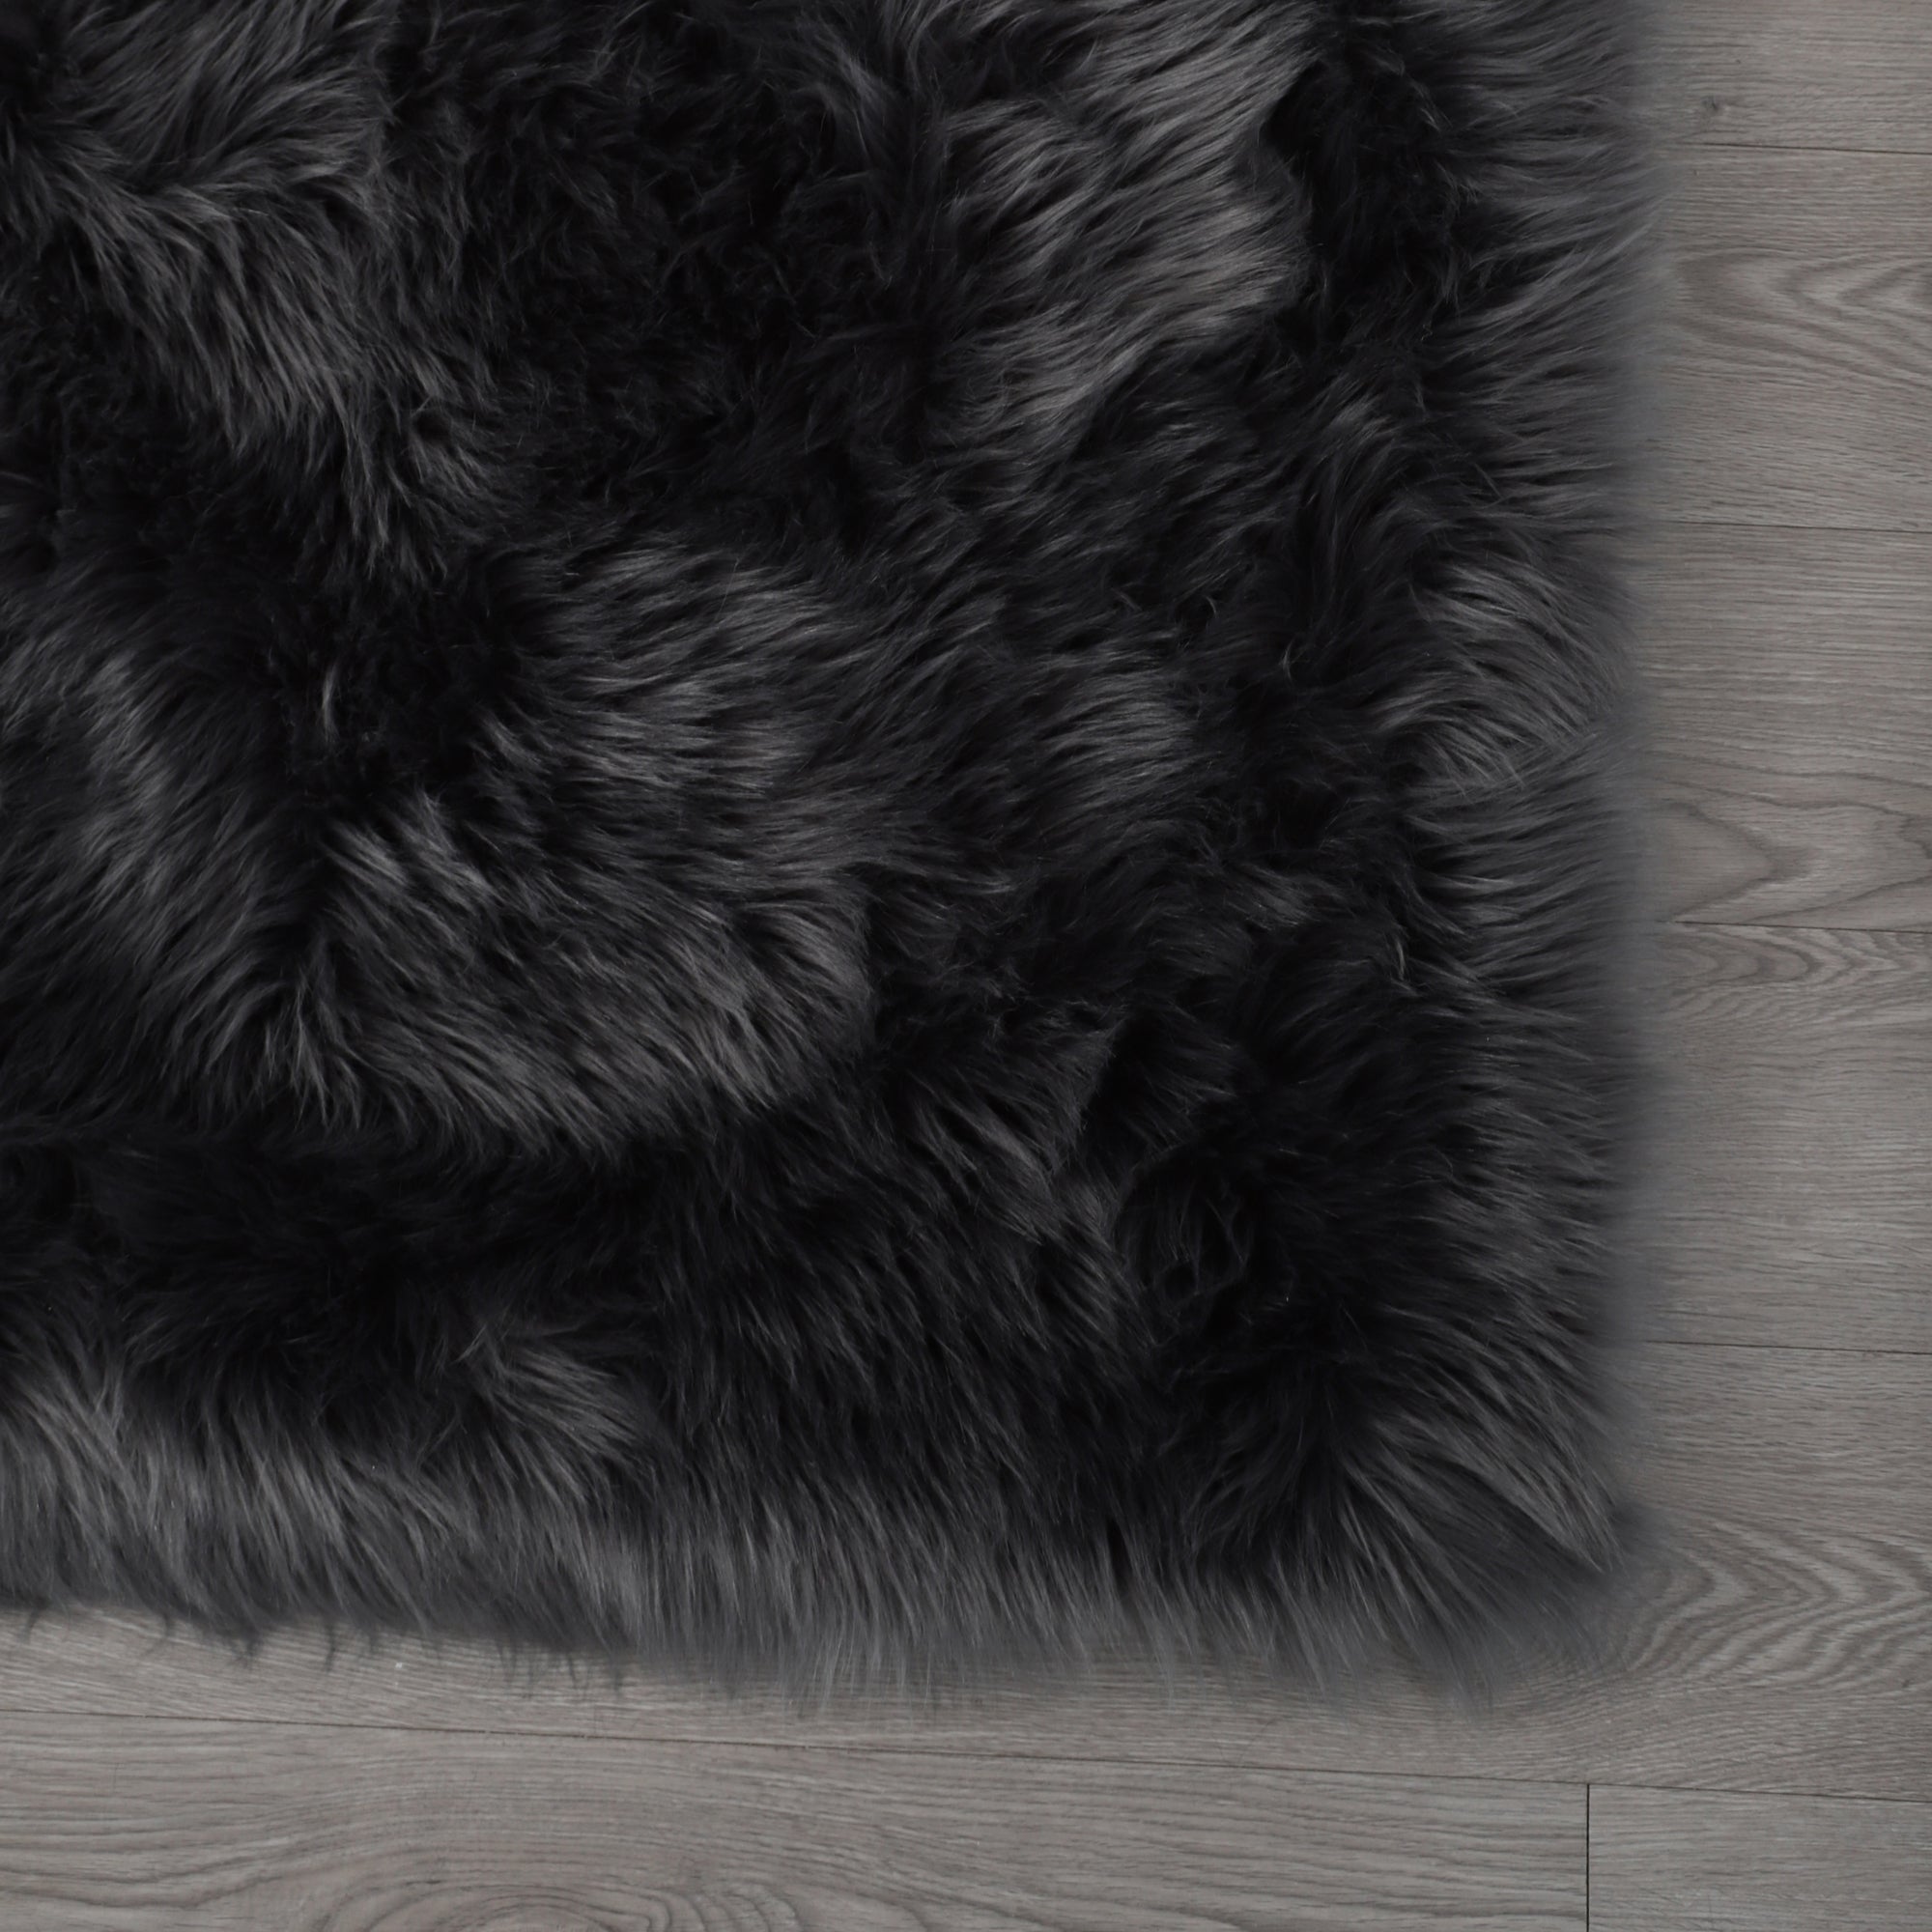 6' x 4' Cozy Collection Ultra Soft Fluffy Faux Fur Sheepskin Area Rug (Gray)